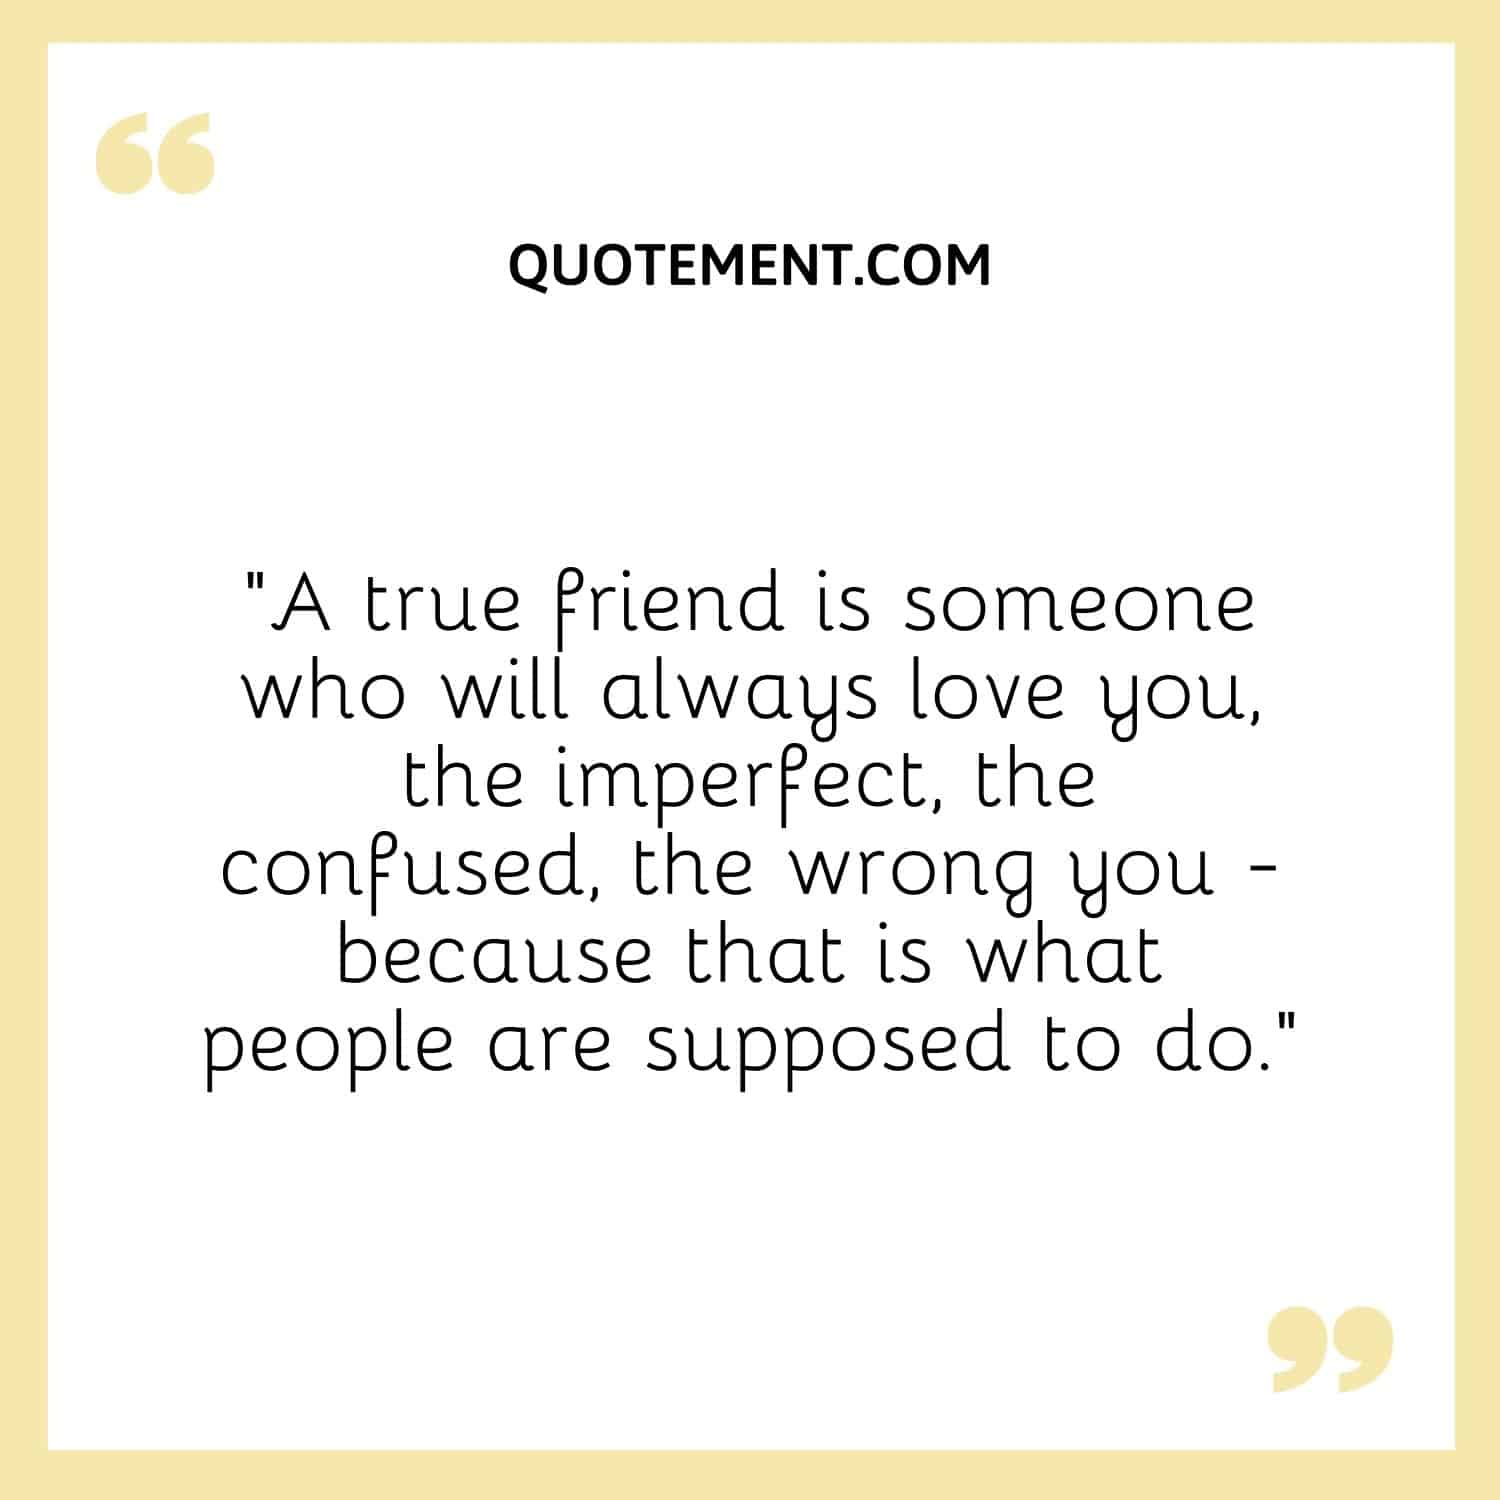 A true friend is someone who will always love you.